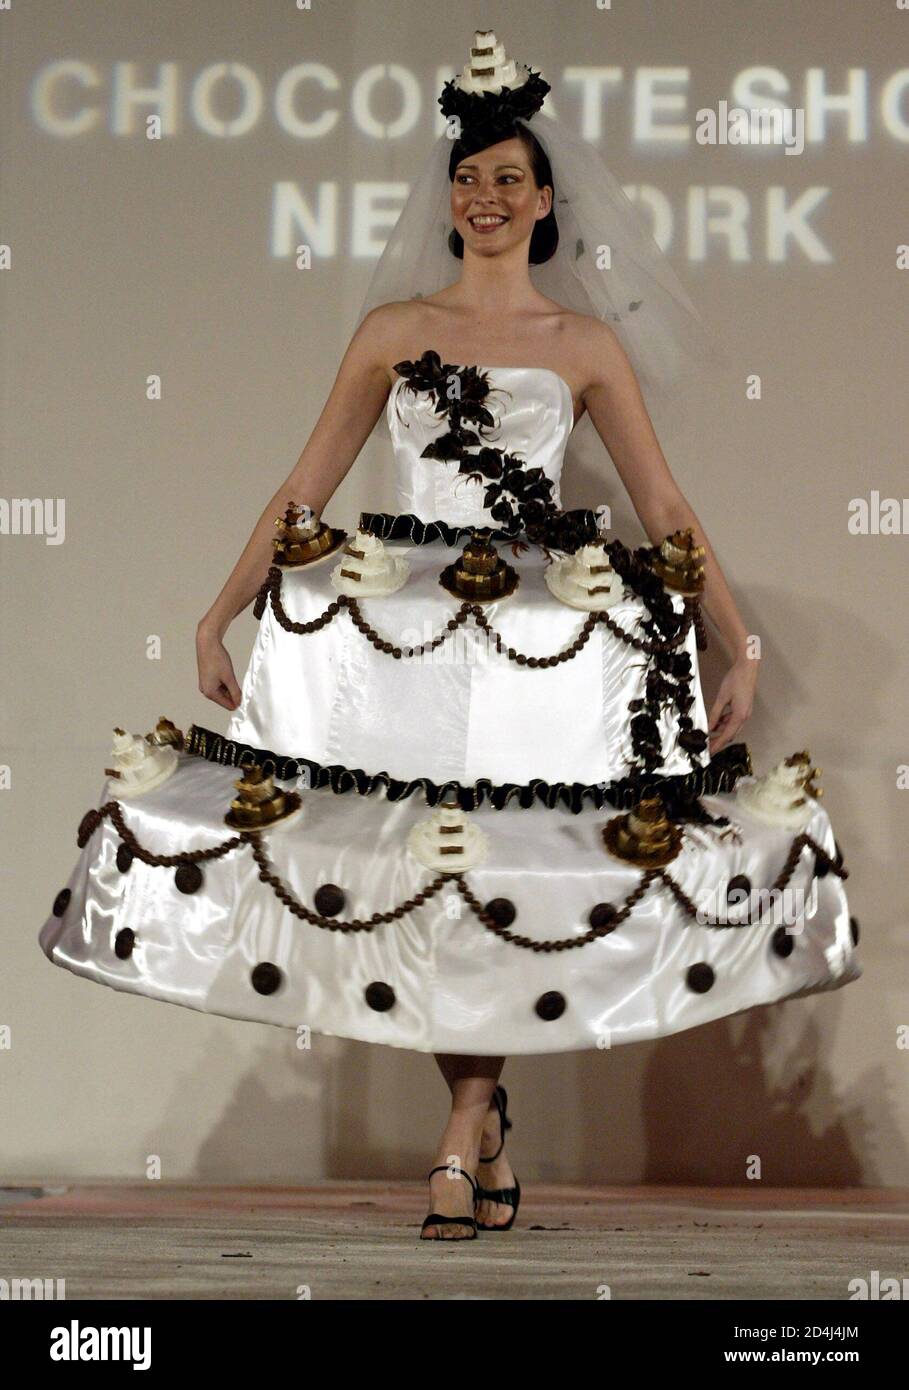 A model walks down the runway wearing a chocolate inspired dress during the  Chocolate Show in New York November 12, 2003. The Chocolate Show combines  chocolate and fashion by pastry chefs and